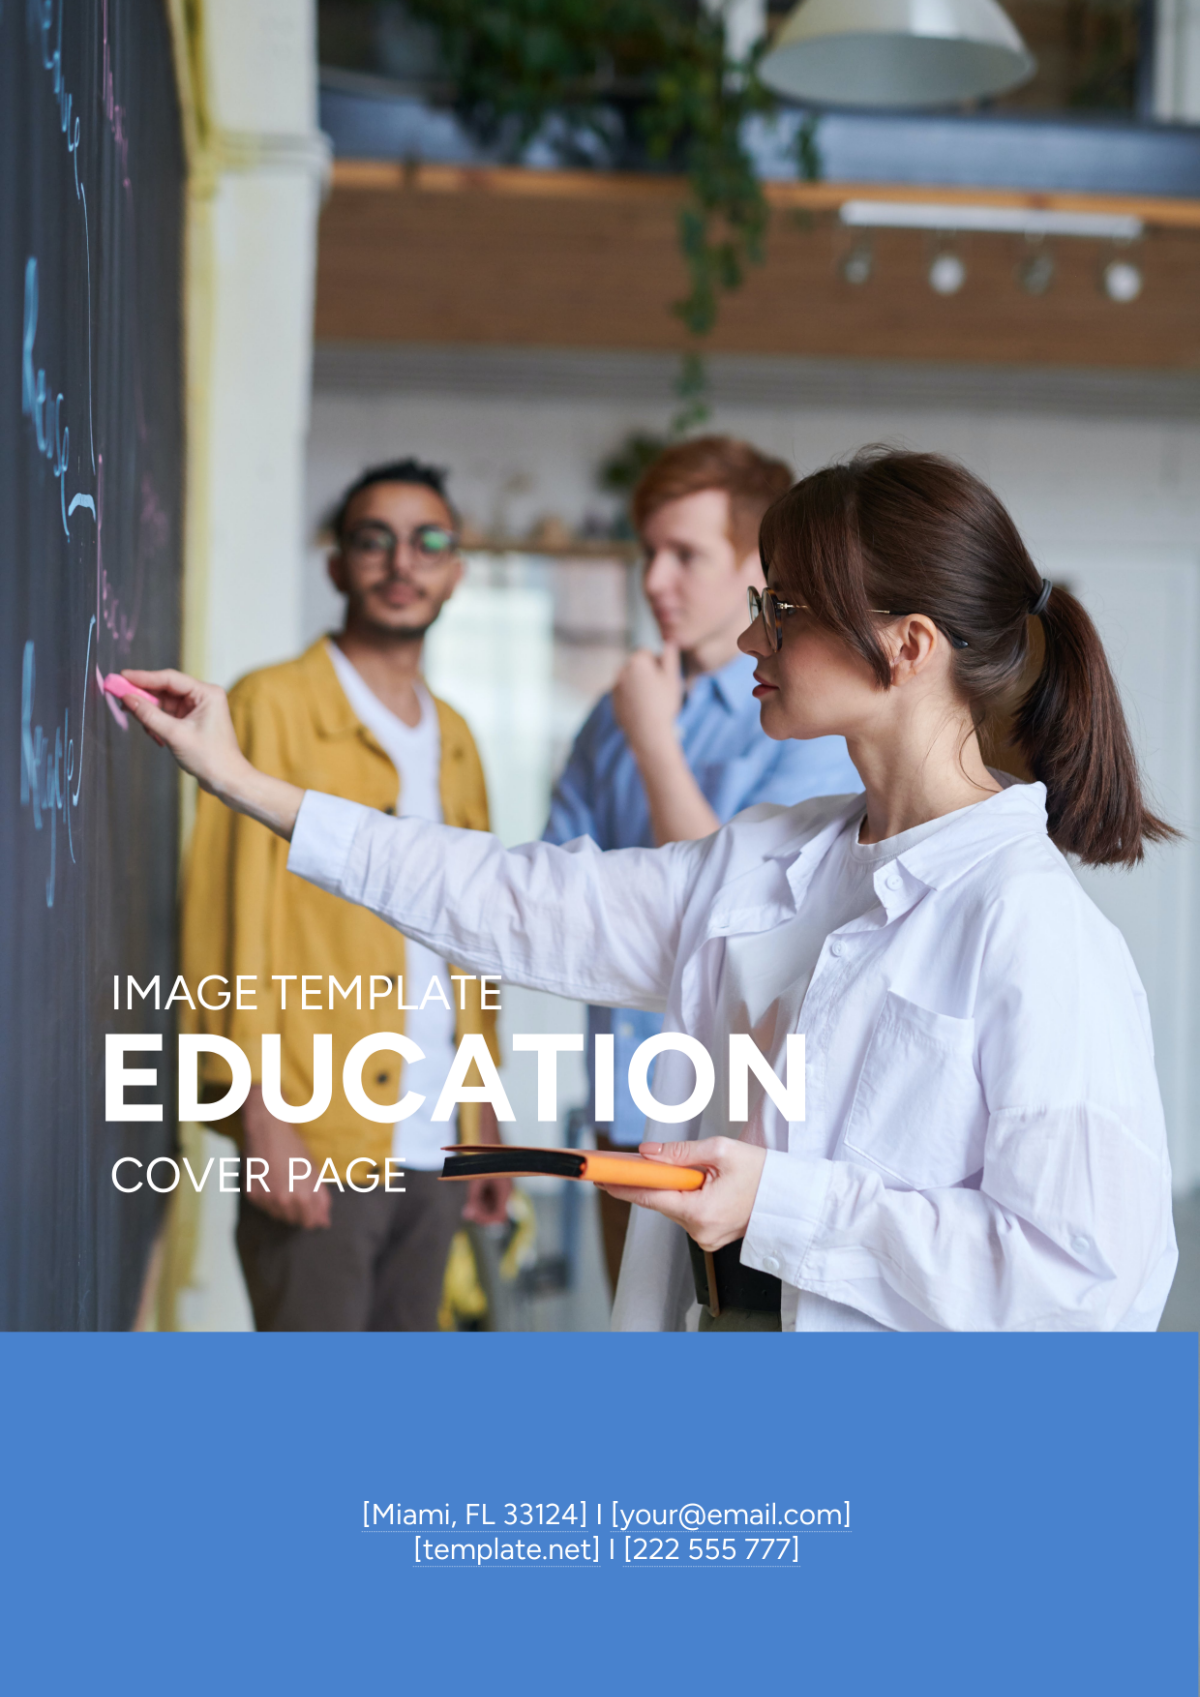 Education Cover Page Image